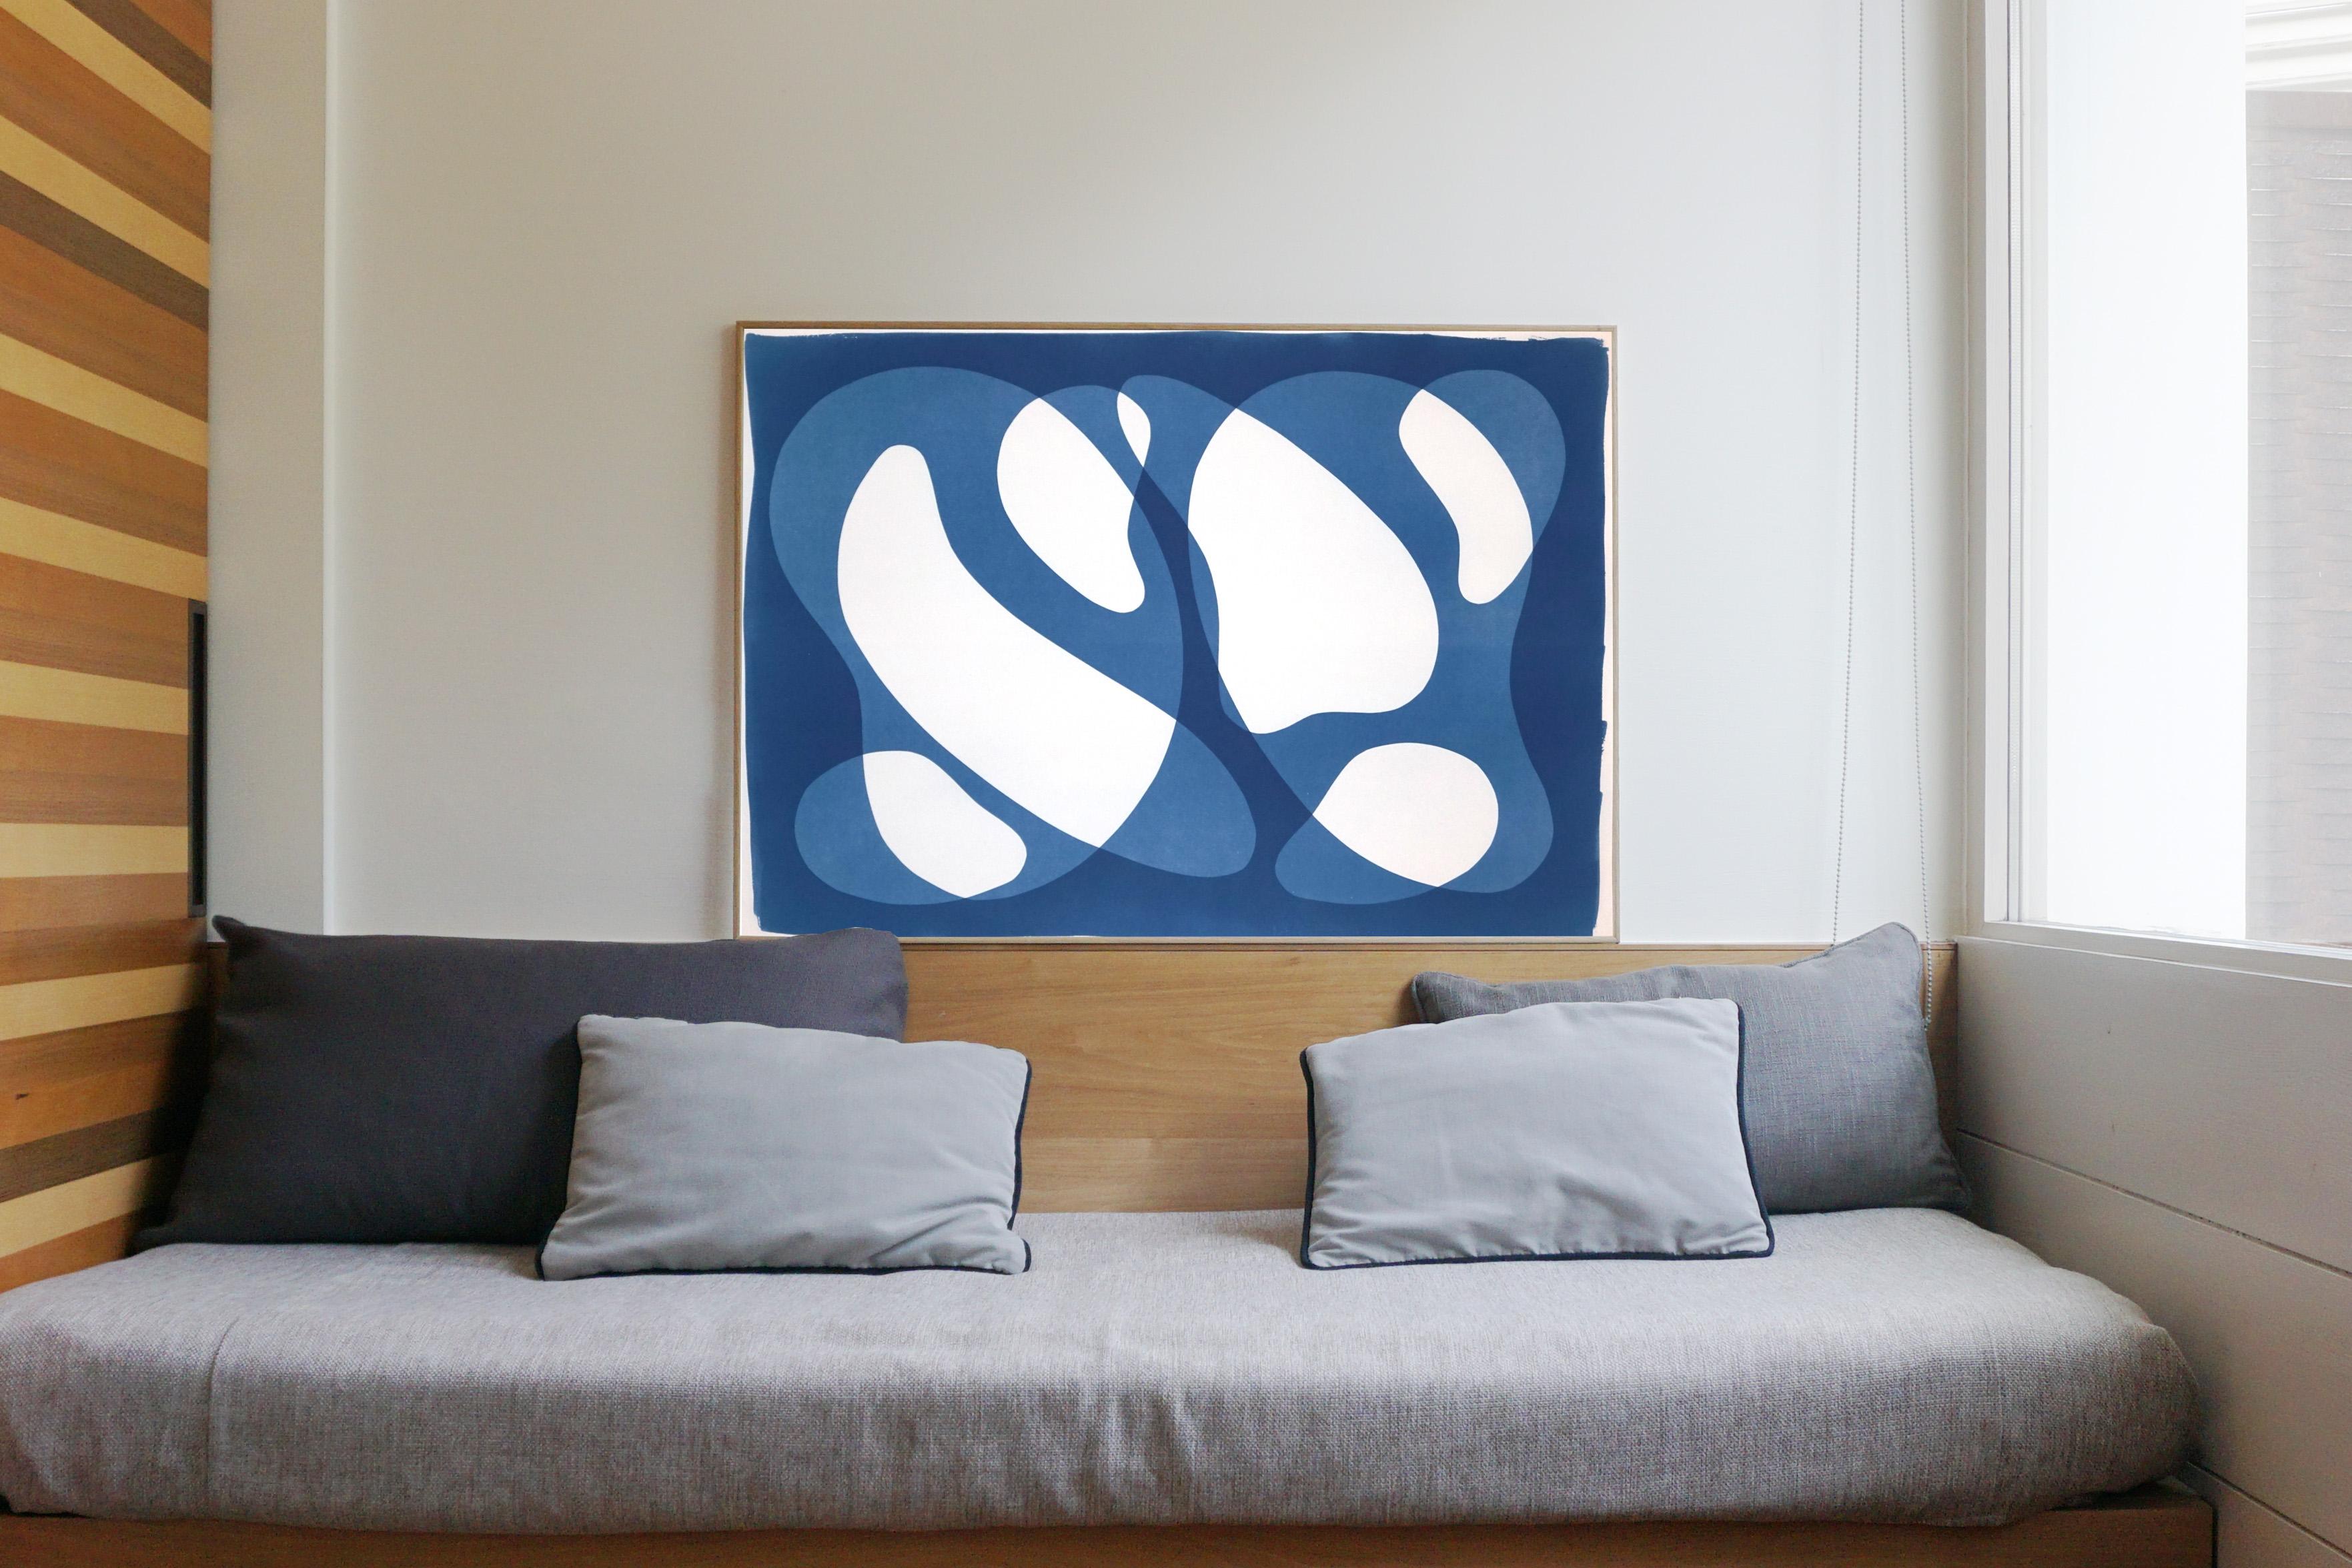 This is an exclusive handprinted unique cyanotype that takes its inspiration from the mid-century modern shapes.
It's made by layering paper cutouts and different exposures using uv-light. 

Details:
+ Title: The Swimmers
+ Year: 2021
+ Stamped and